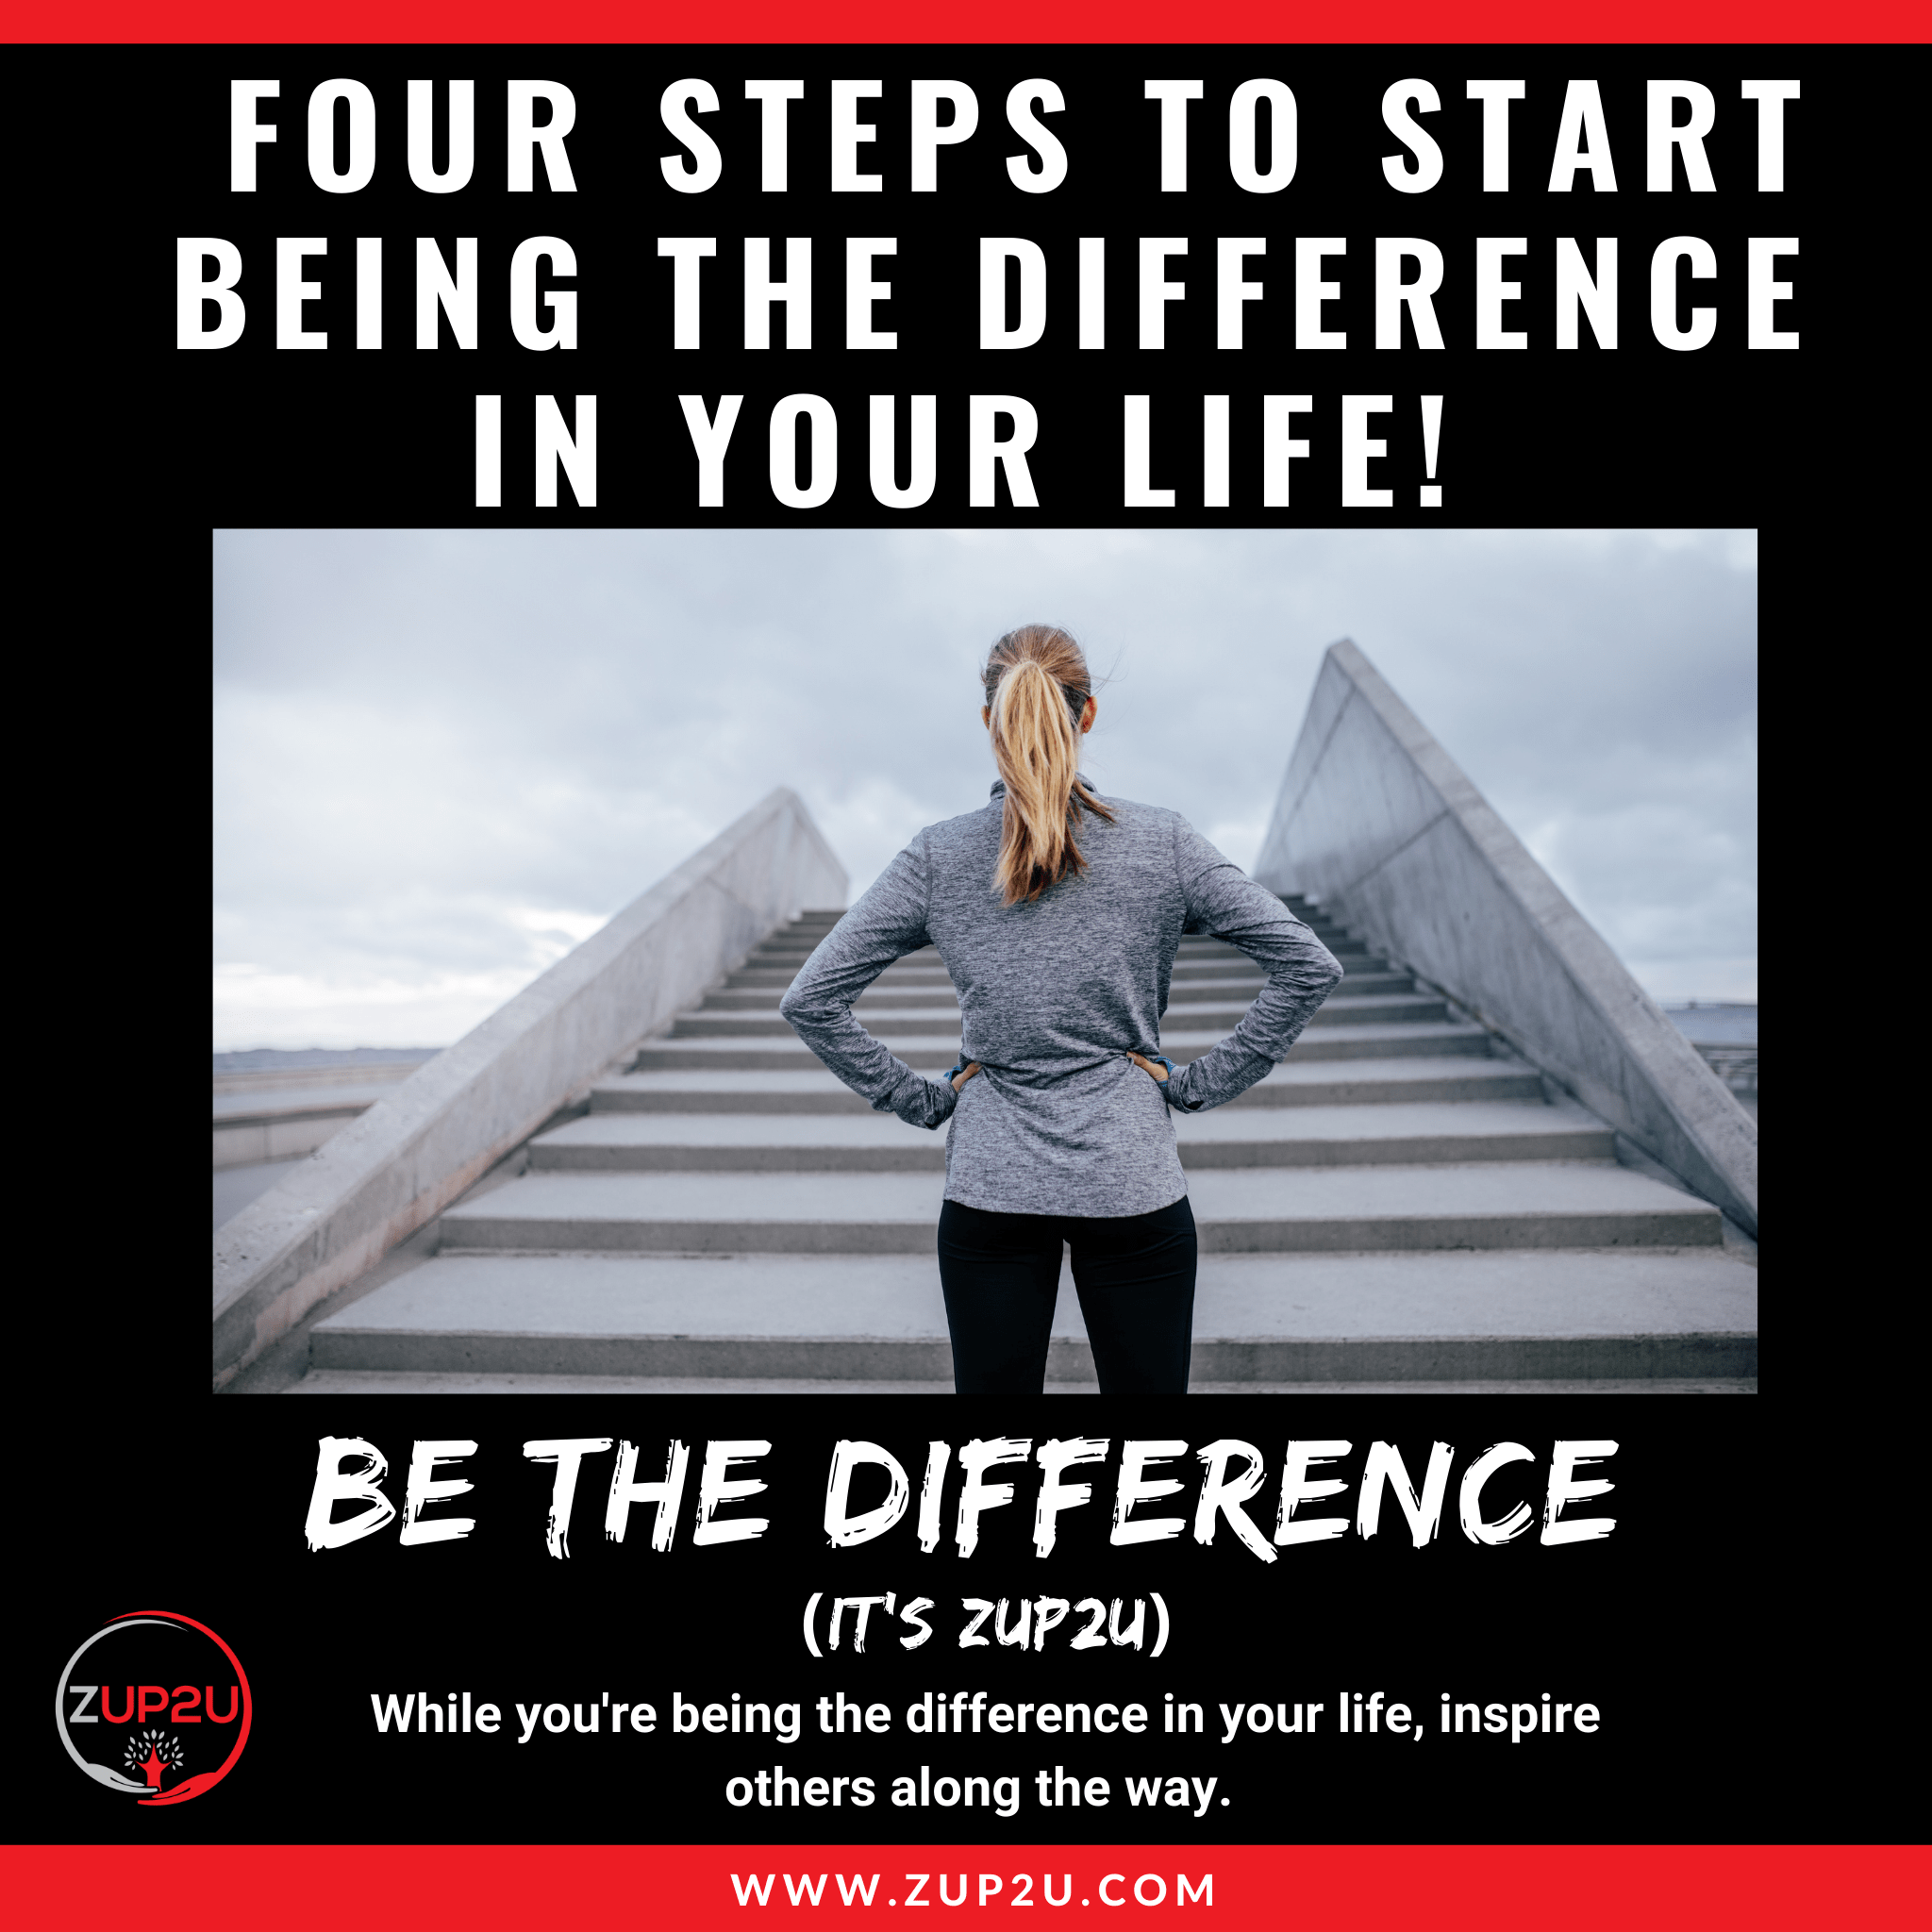 Four Steps to Start Being the Difference in Your Life.